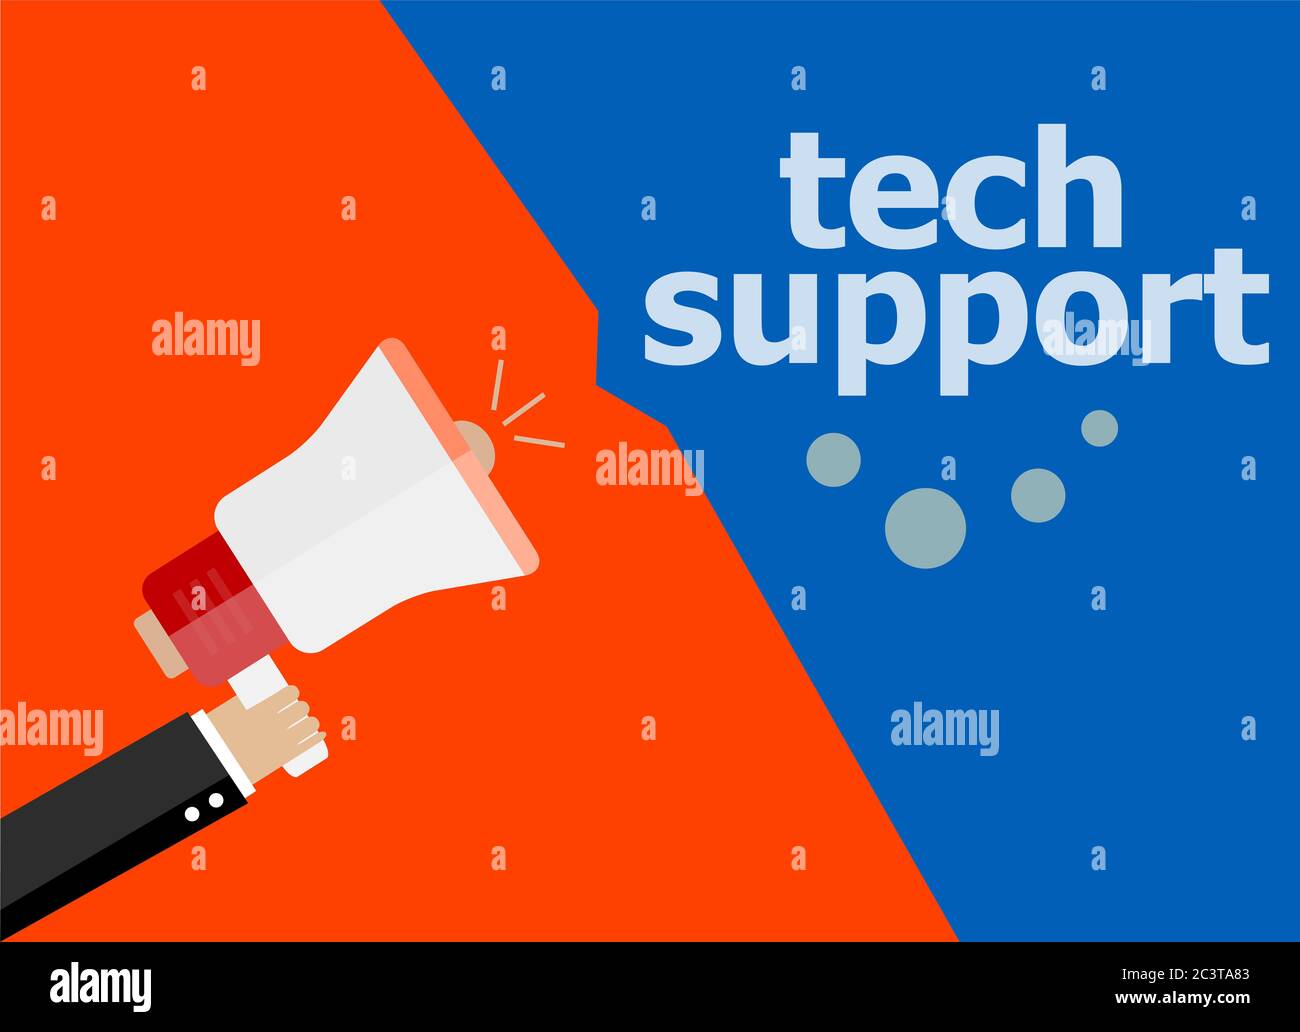 tech support. Hand holding a megaphone. flat style Stock Photo